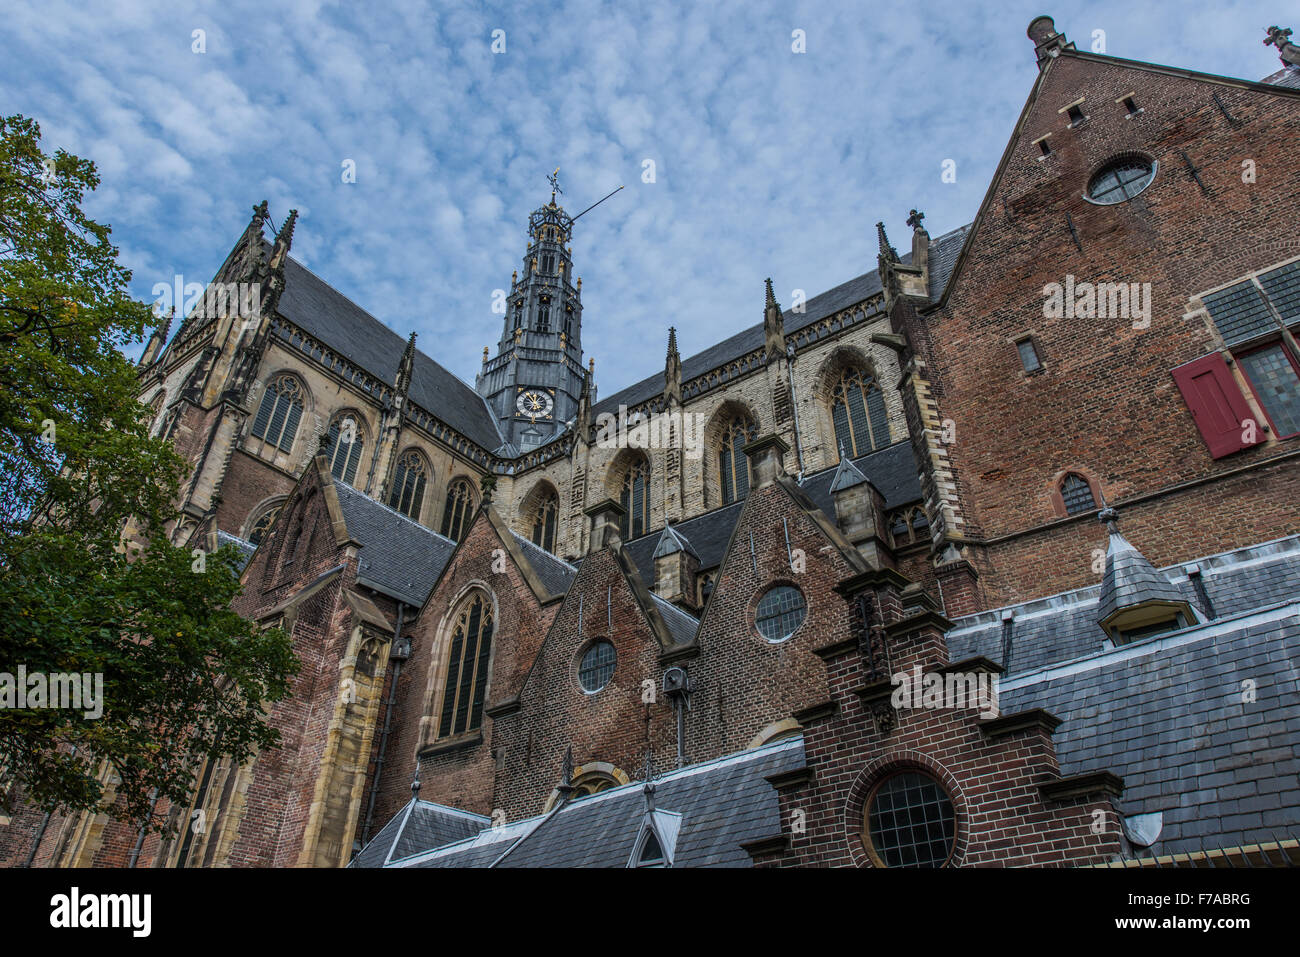 The Sint Bavo Church In Haarlem Which Is The Biggest Church In The F7ABRG 